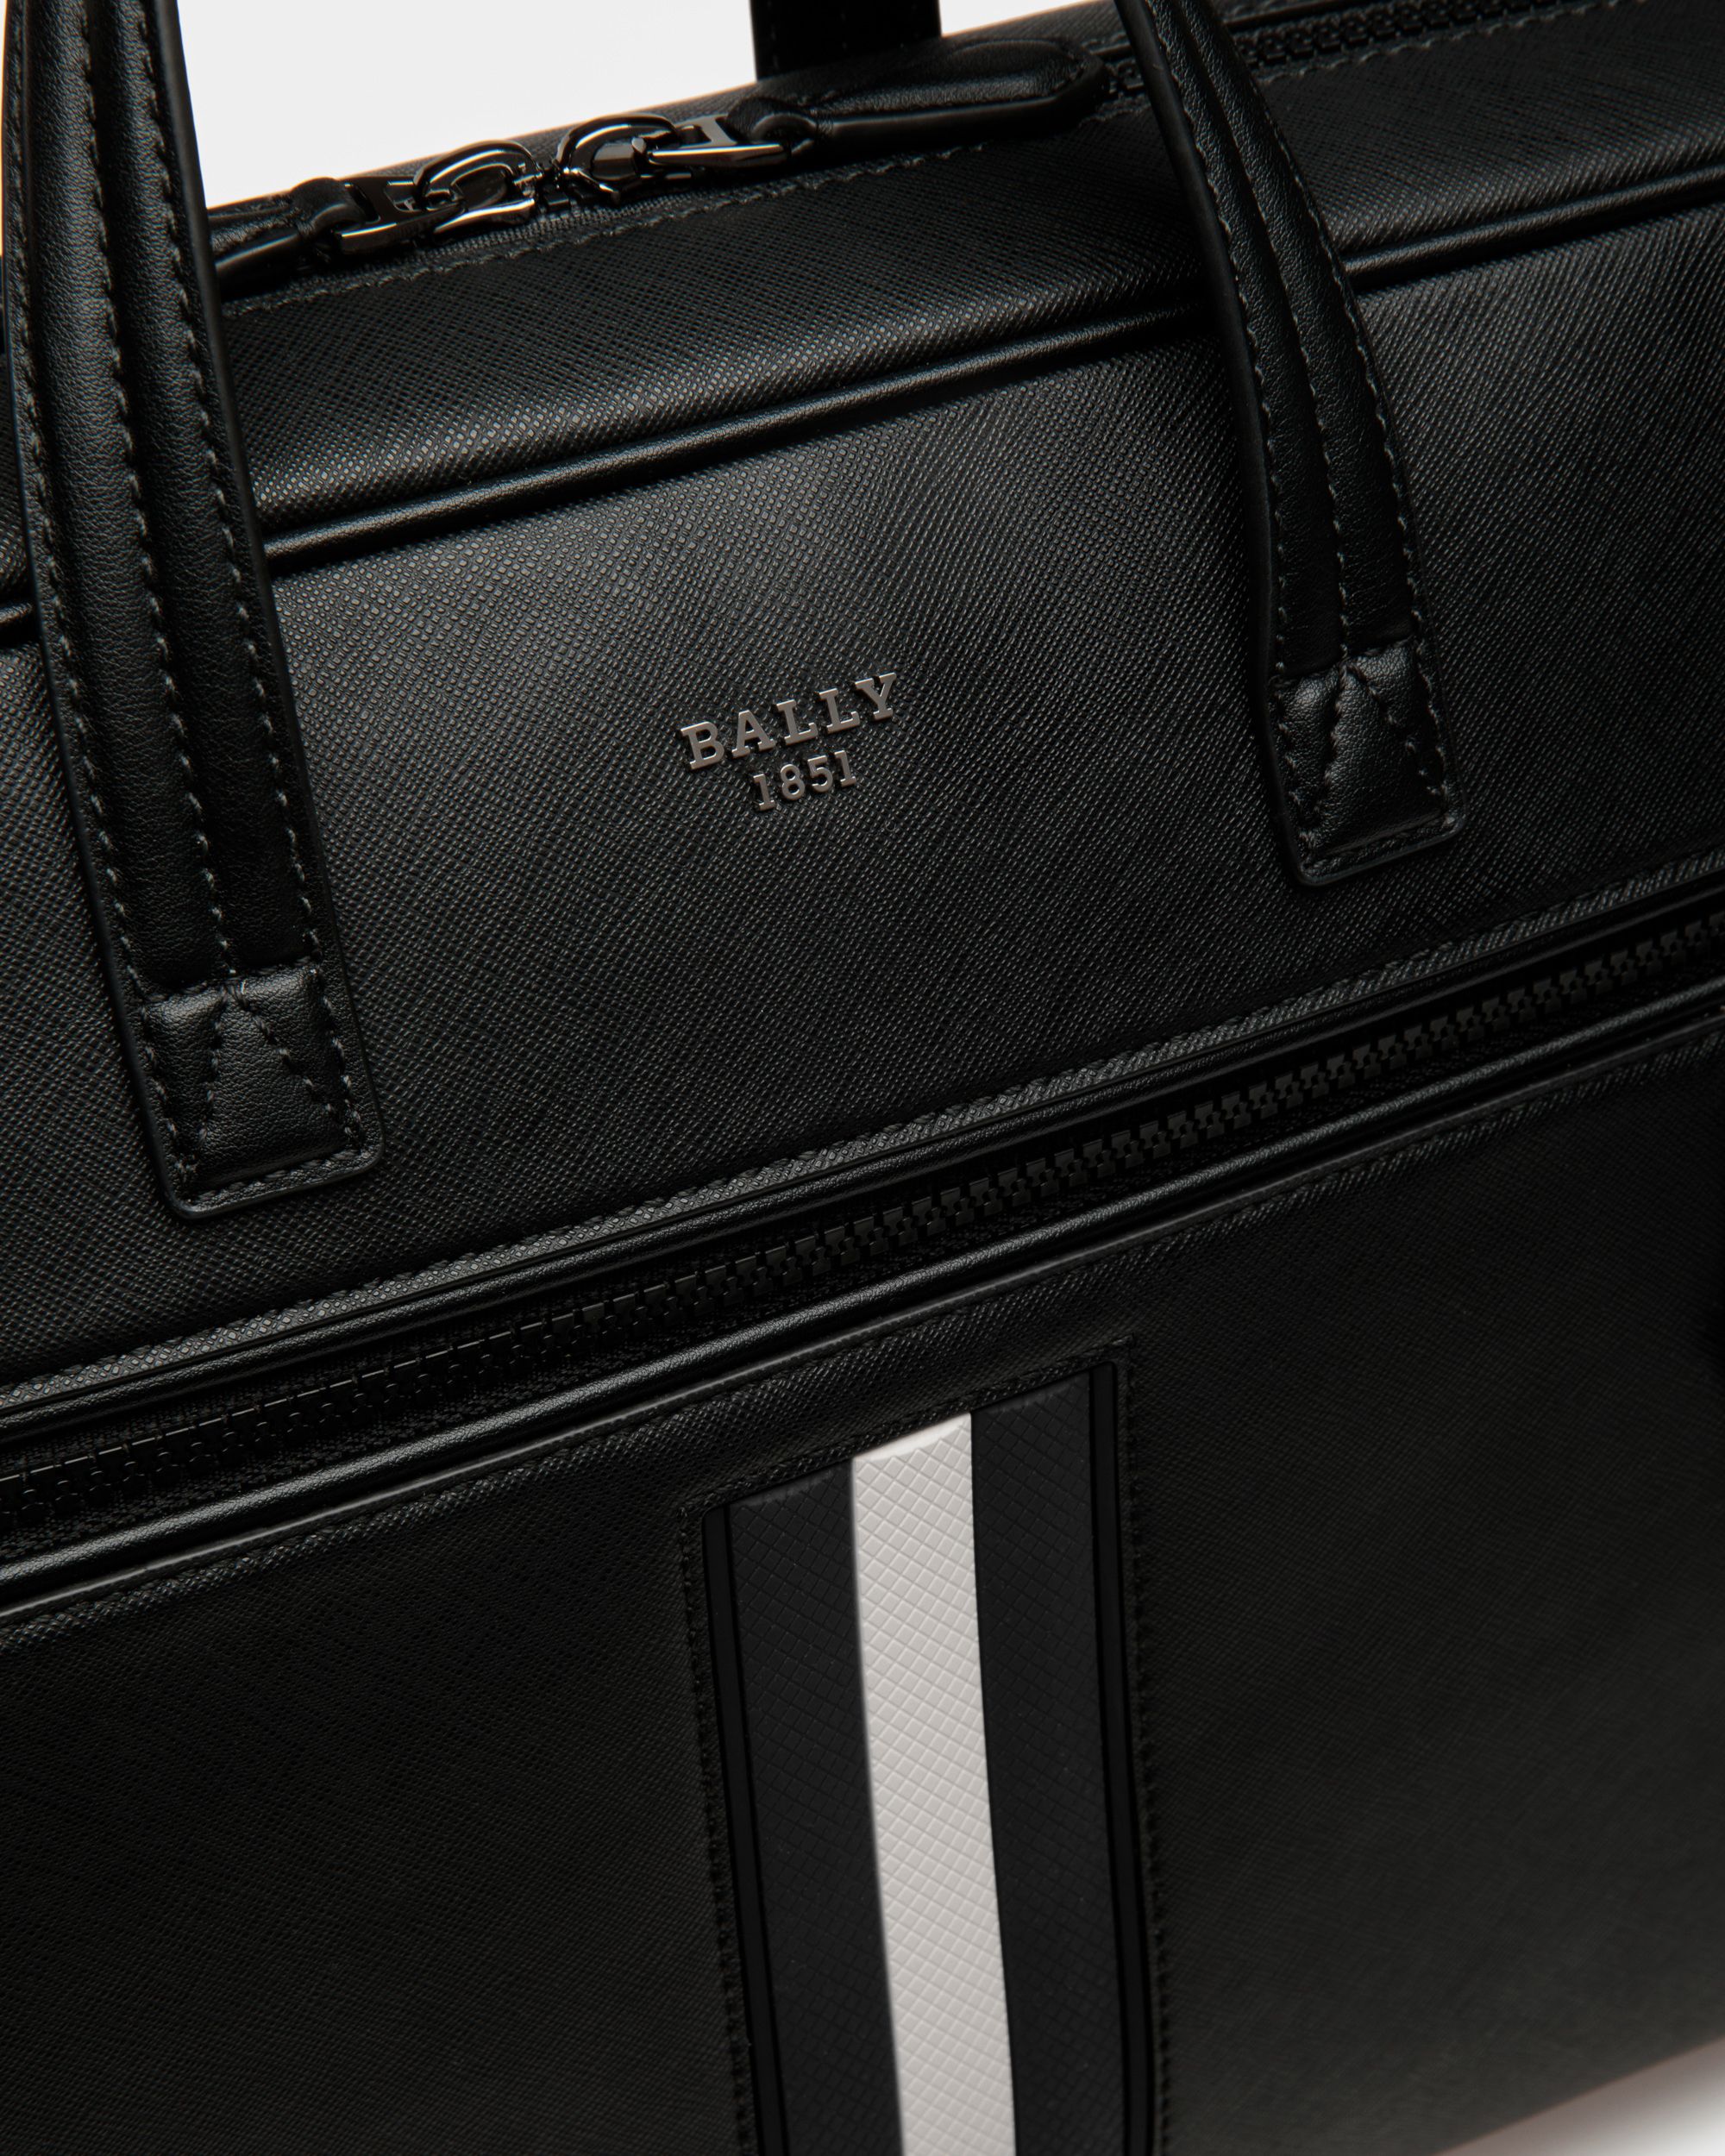 Mikes | Men's Business Bag | Black Leather | Bally | Still Life Detail